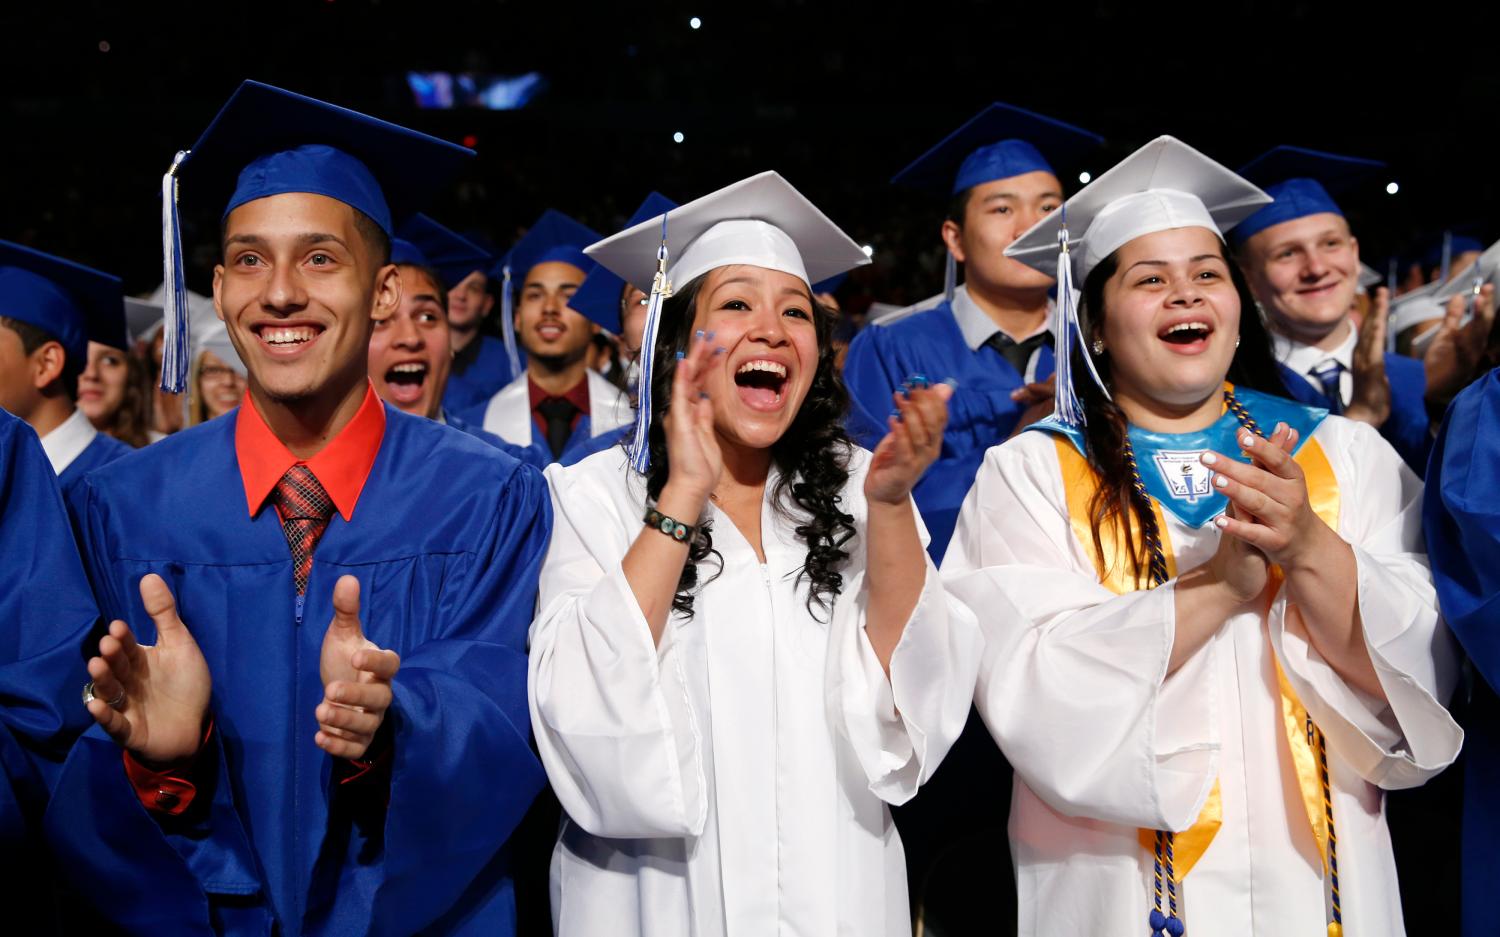 Students applaud as U.S. President Barack Obama arrives to deliver the commencement address at the Worcester Technical High School graduation ceremony in Worcester, Massachusetts June 11, 2014. REUTERS/Kevin Lamarque (UNITED STATES - Tags: POLITICS EDUCATION) - GM1EA6C0JR601